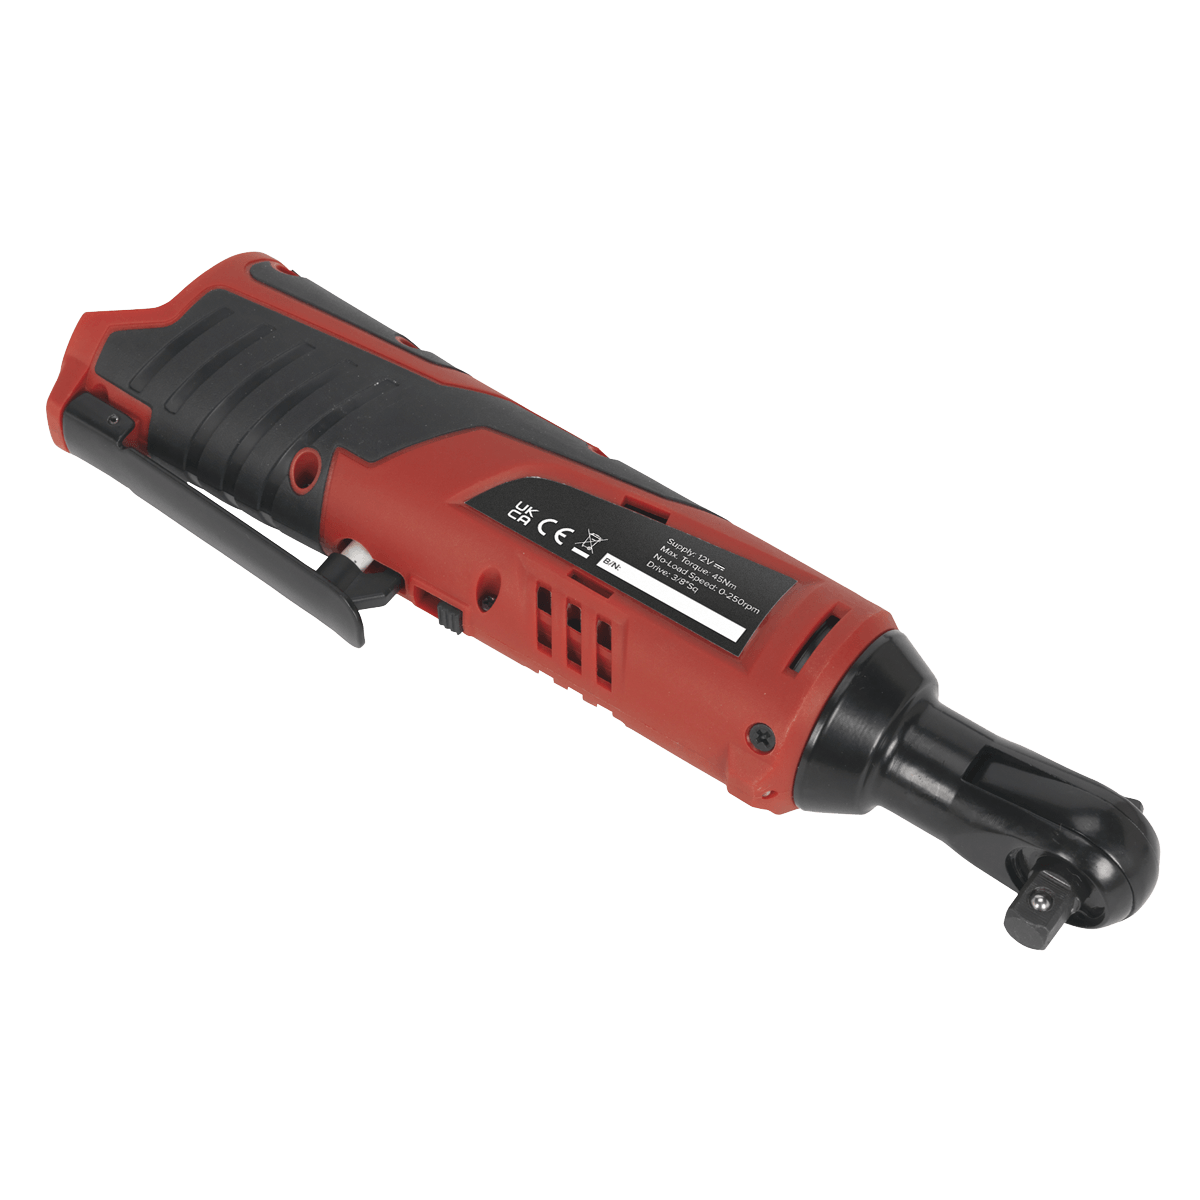 Sealey Cordless Ratchet Wrench 3/8"Sq Drive 12V SV12 Series - Body Only CP1202 - Tools 2U Direct SW